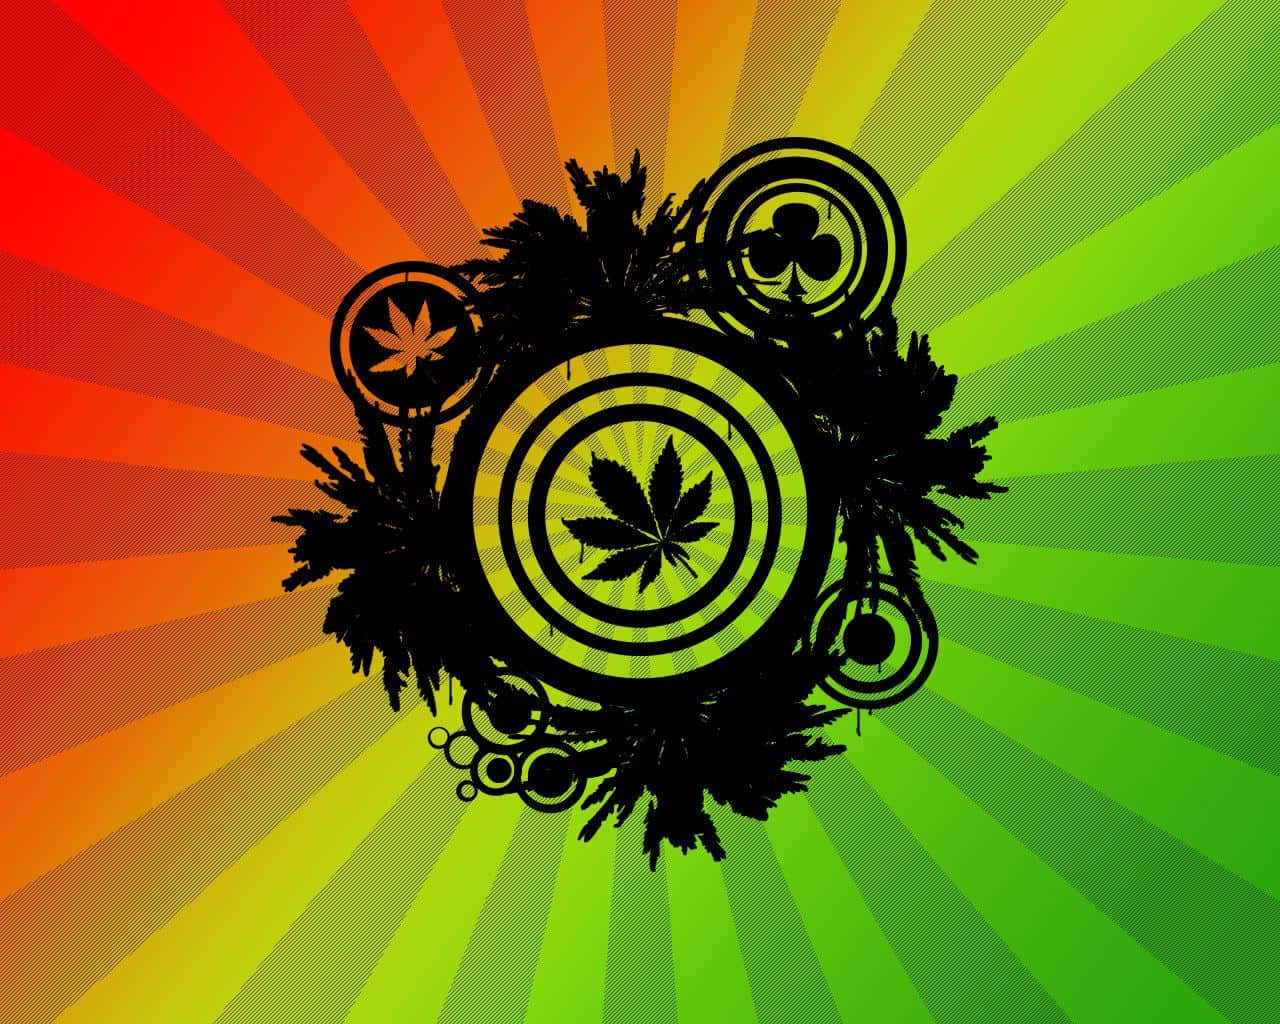 “Psychedelic Weed: Experience the Mind-Expanding High” Wallpaper